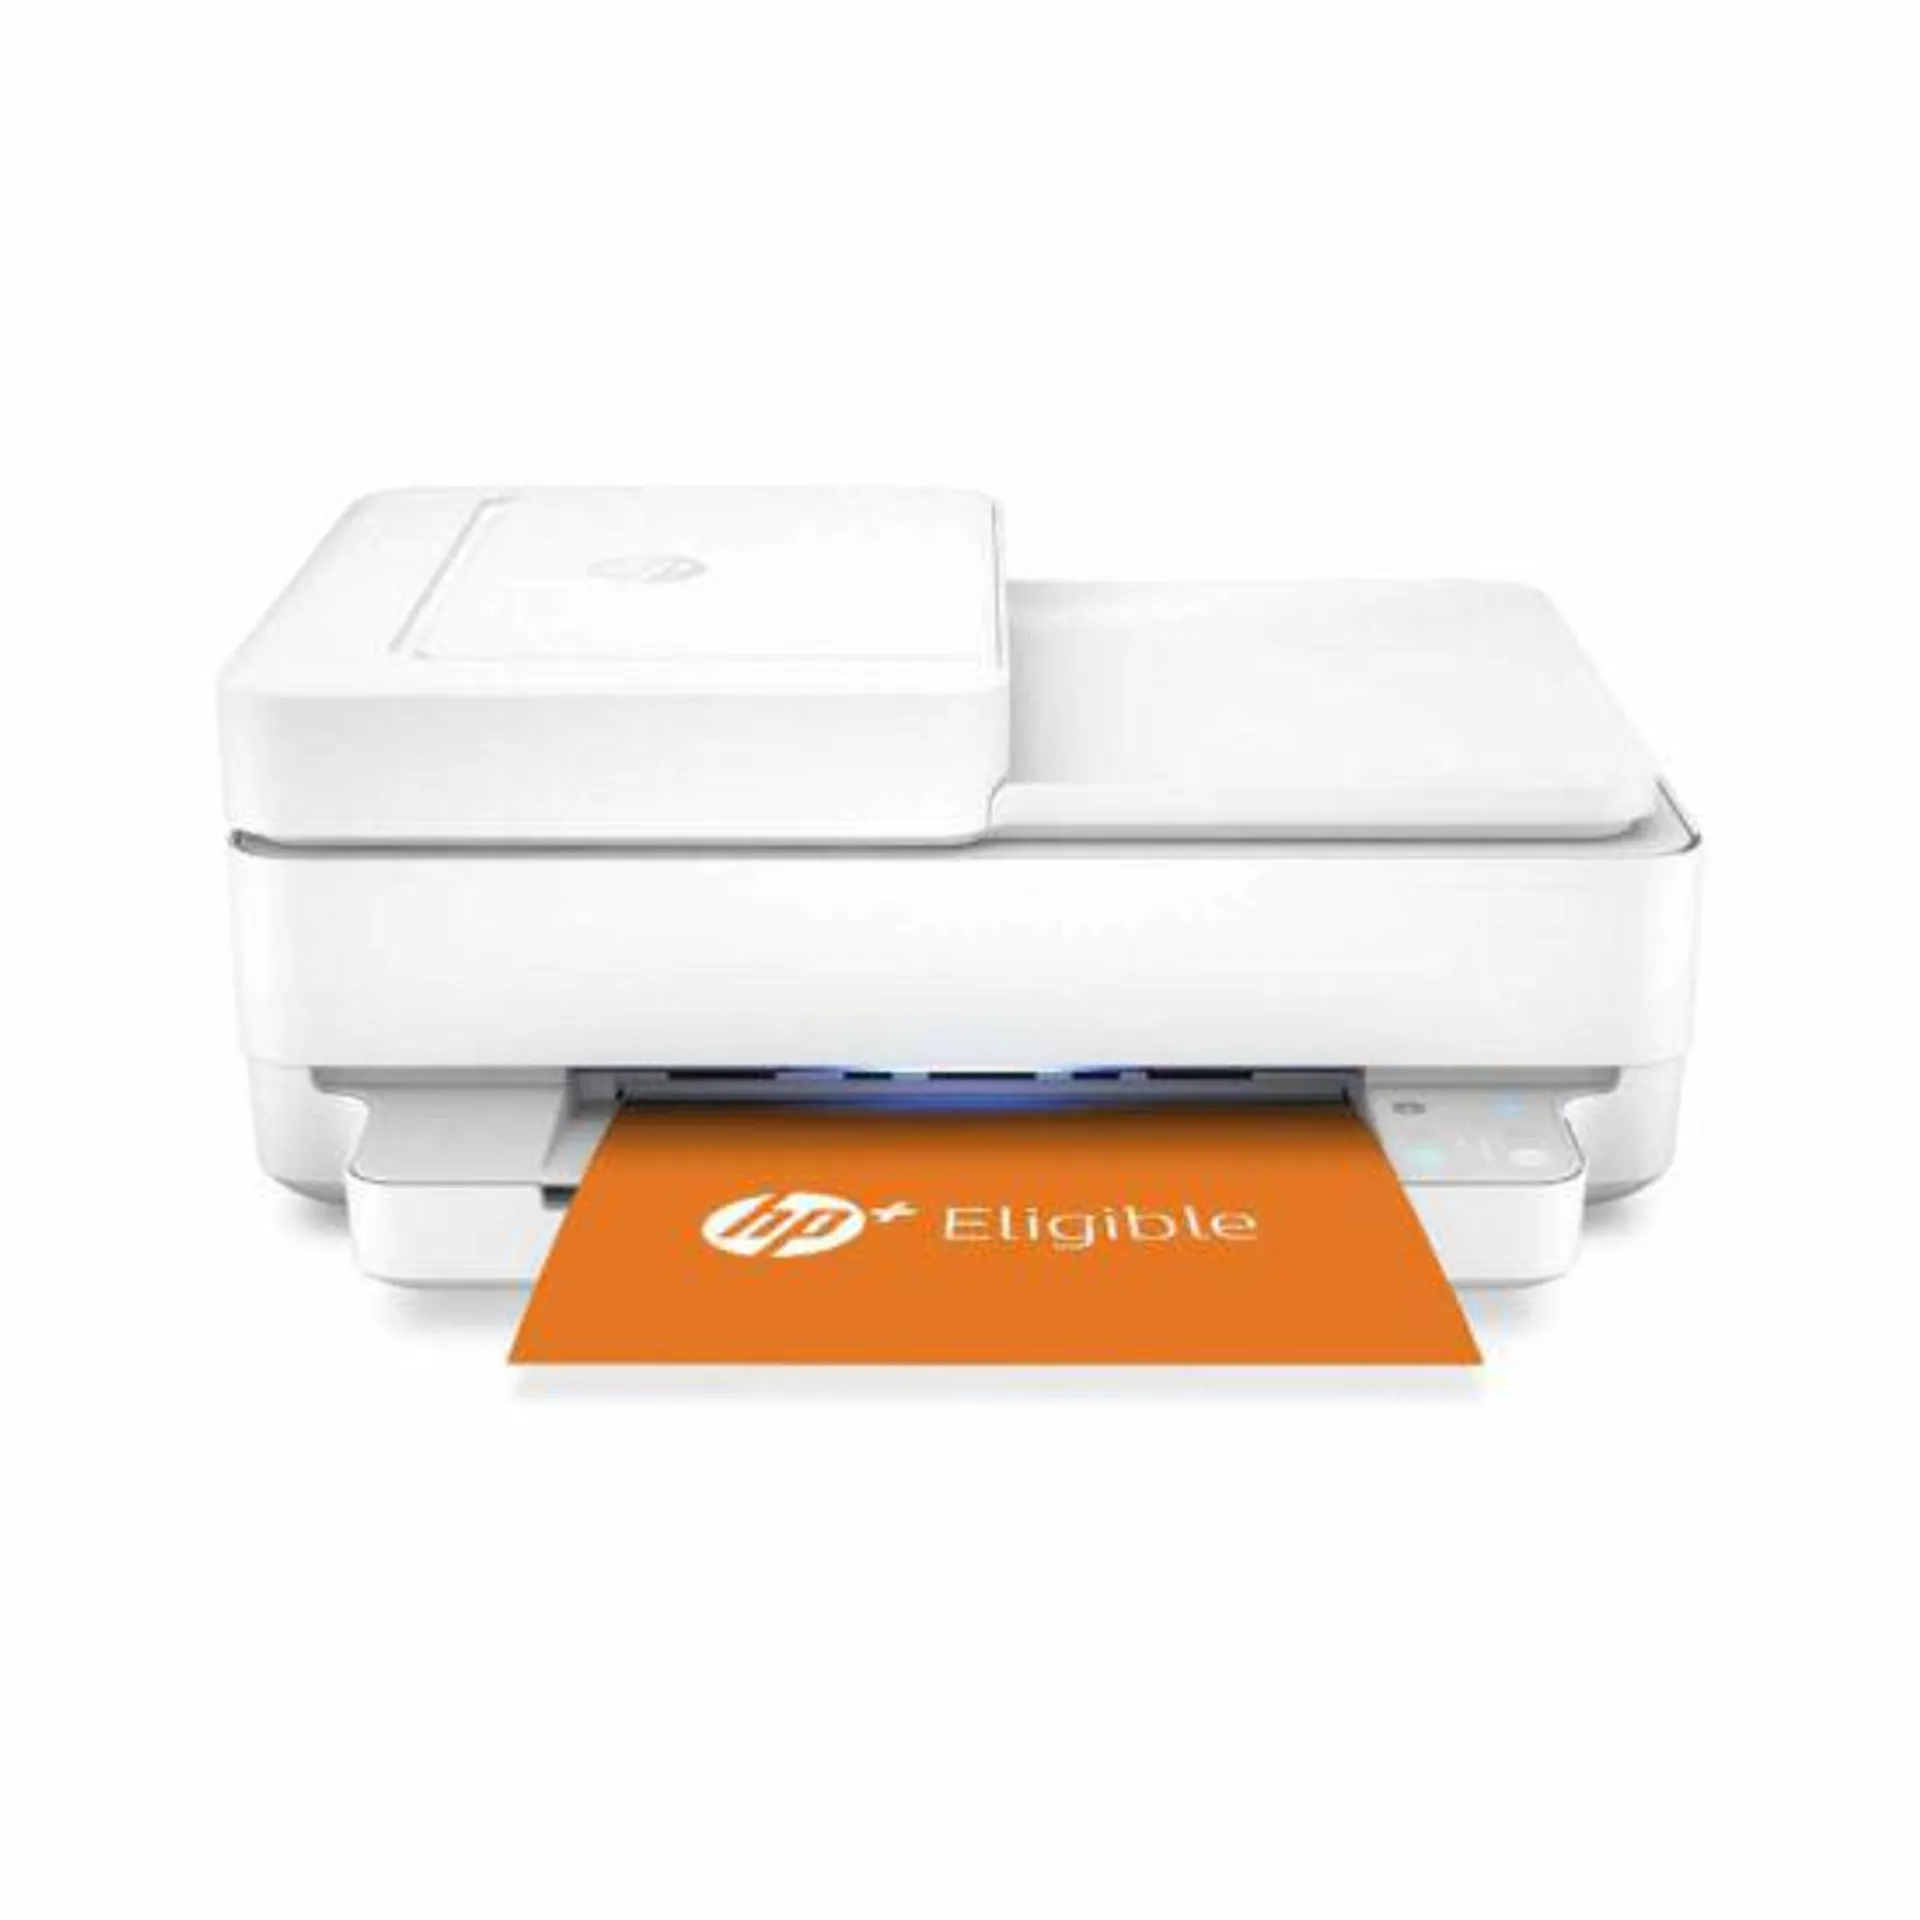 HP Envy 6430e All In One Wireless Inkjet Printer with HP Plus and 6 Months Instant Ink